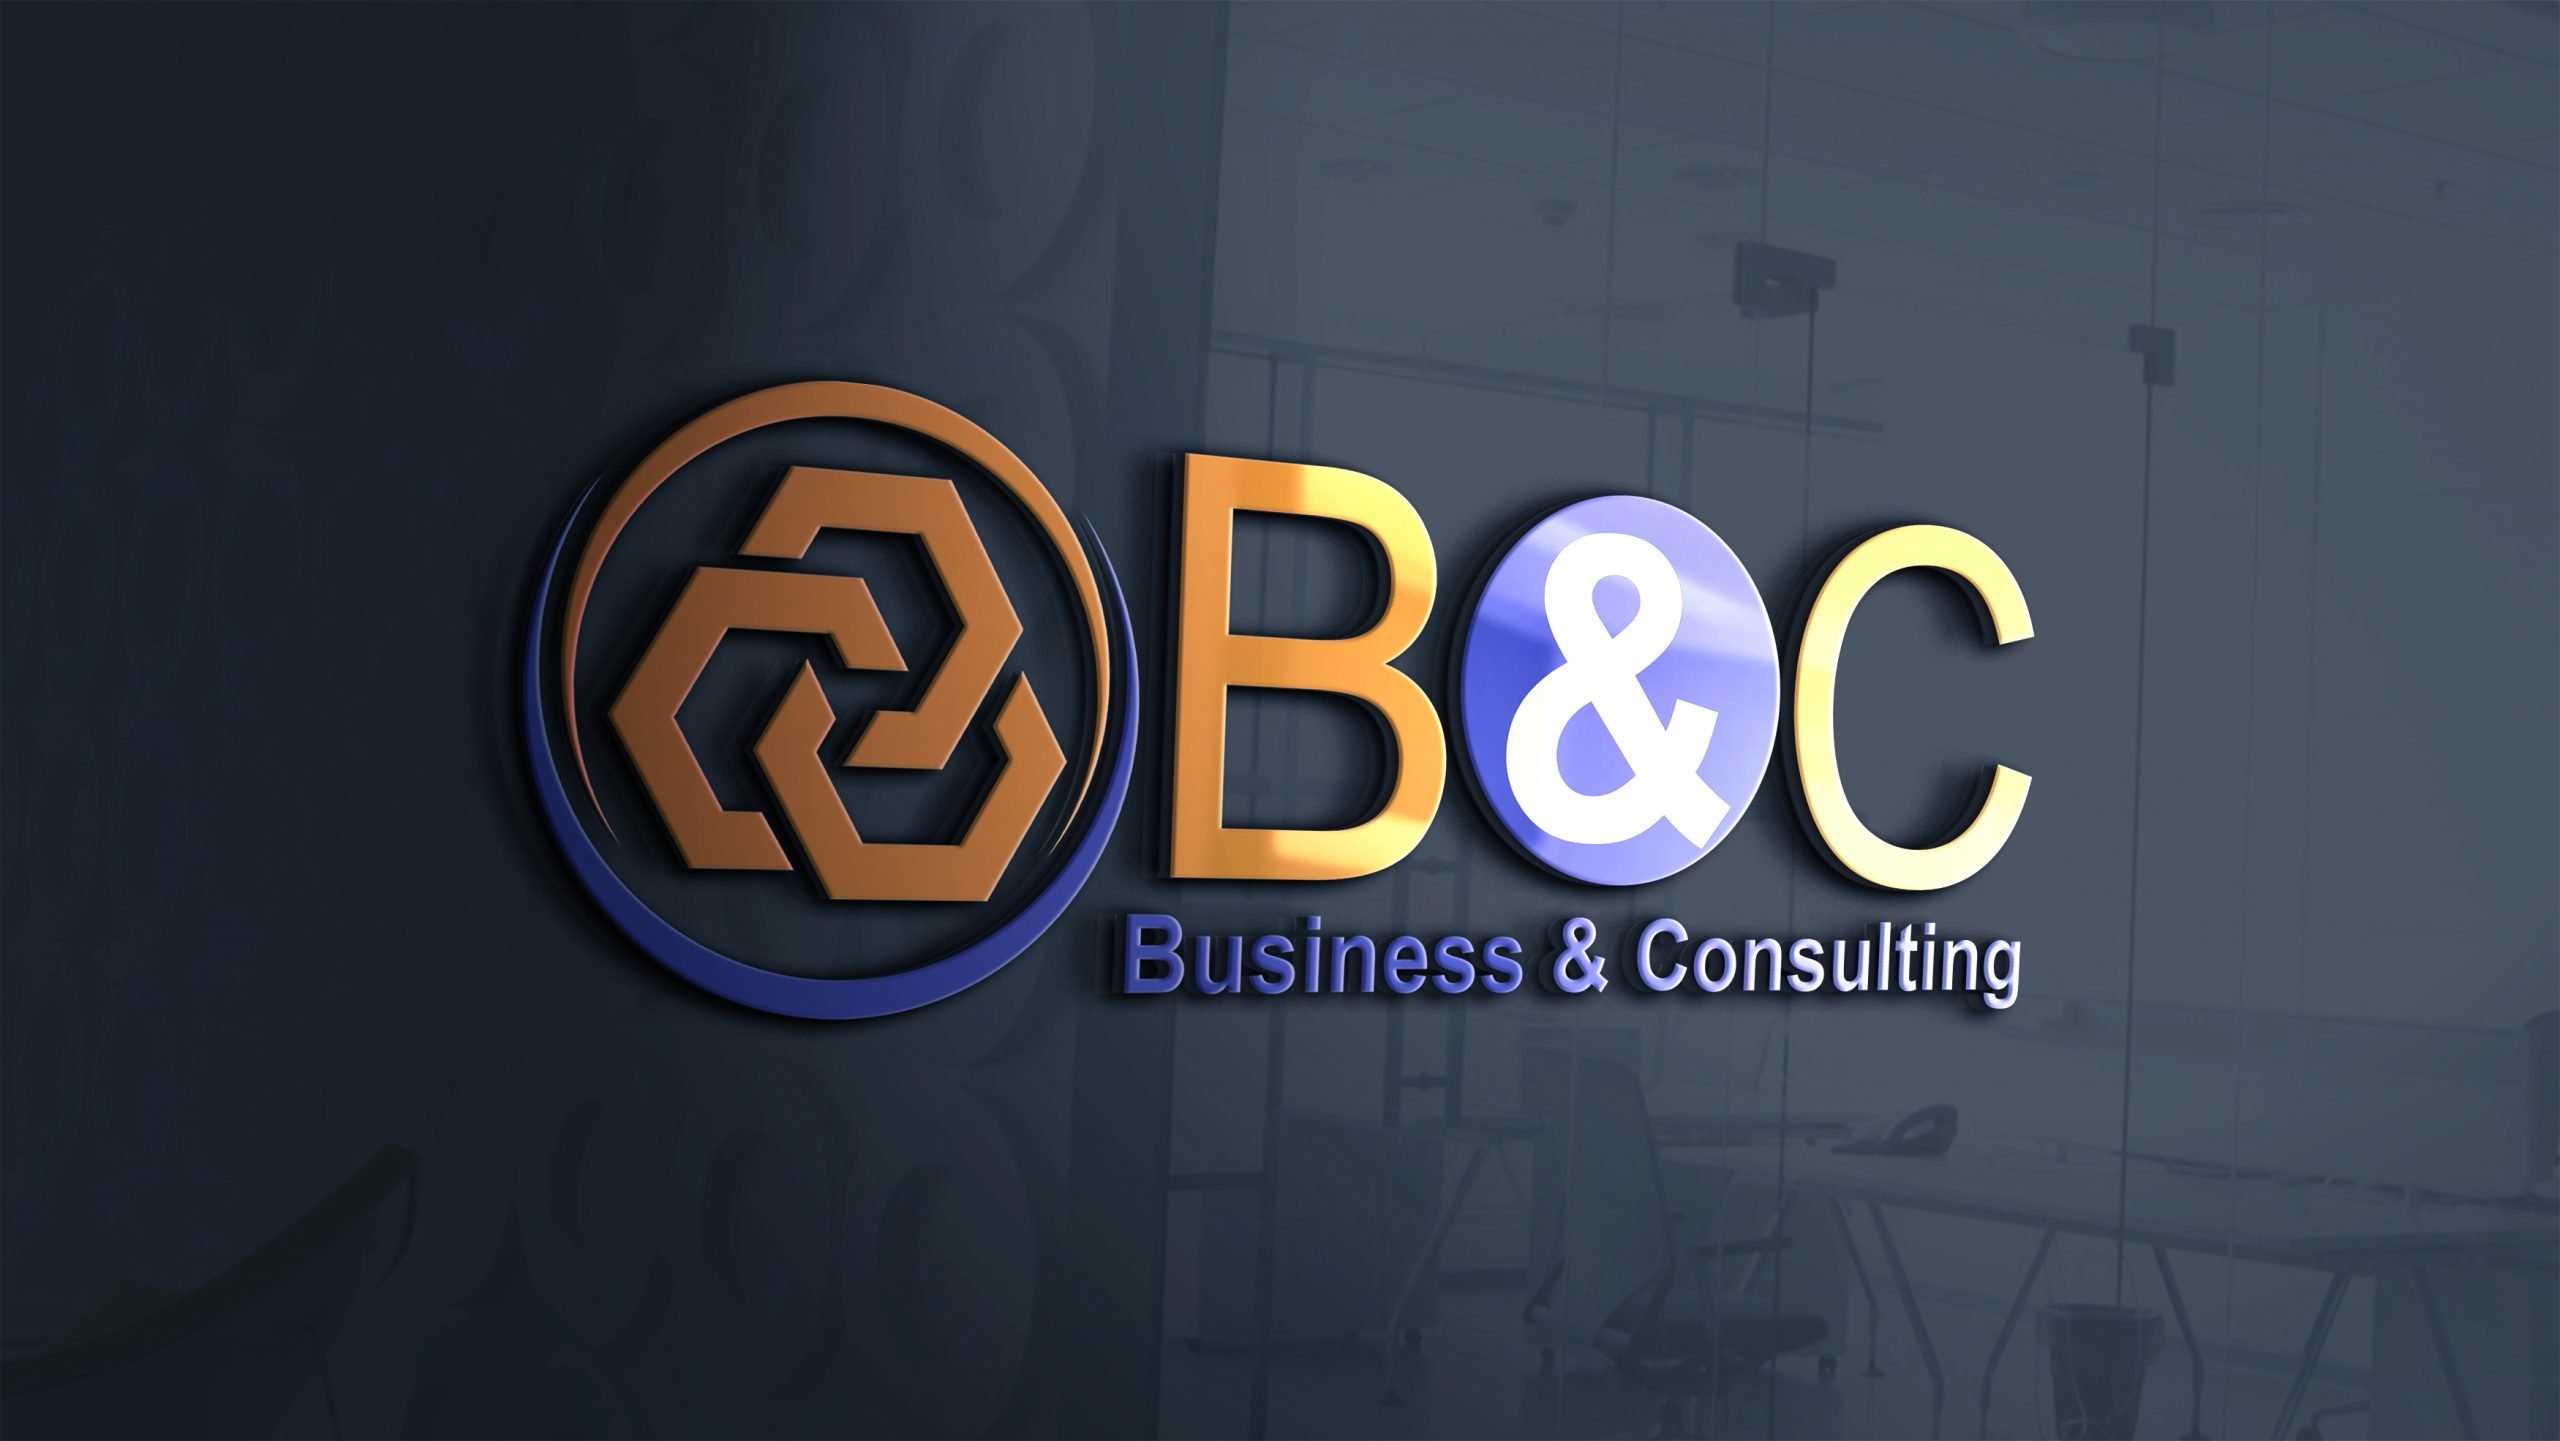 business consulting logo on 3d glass window